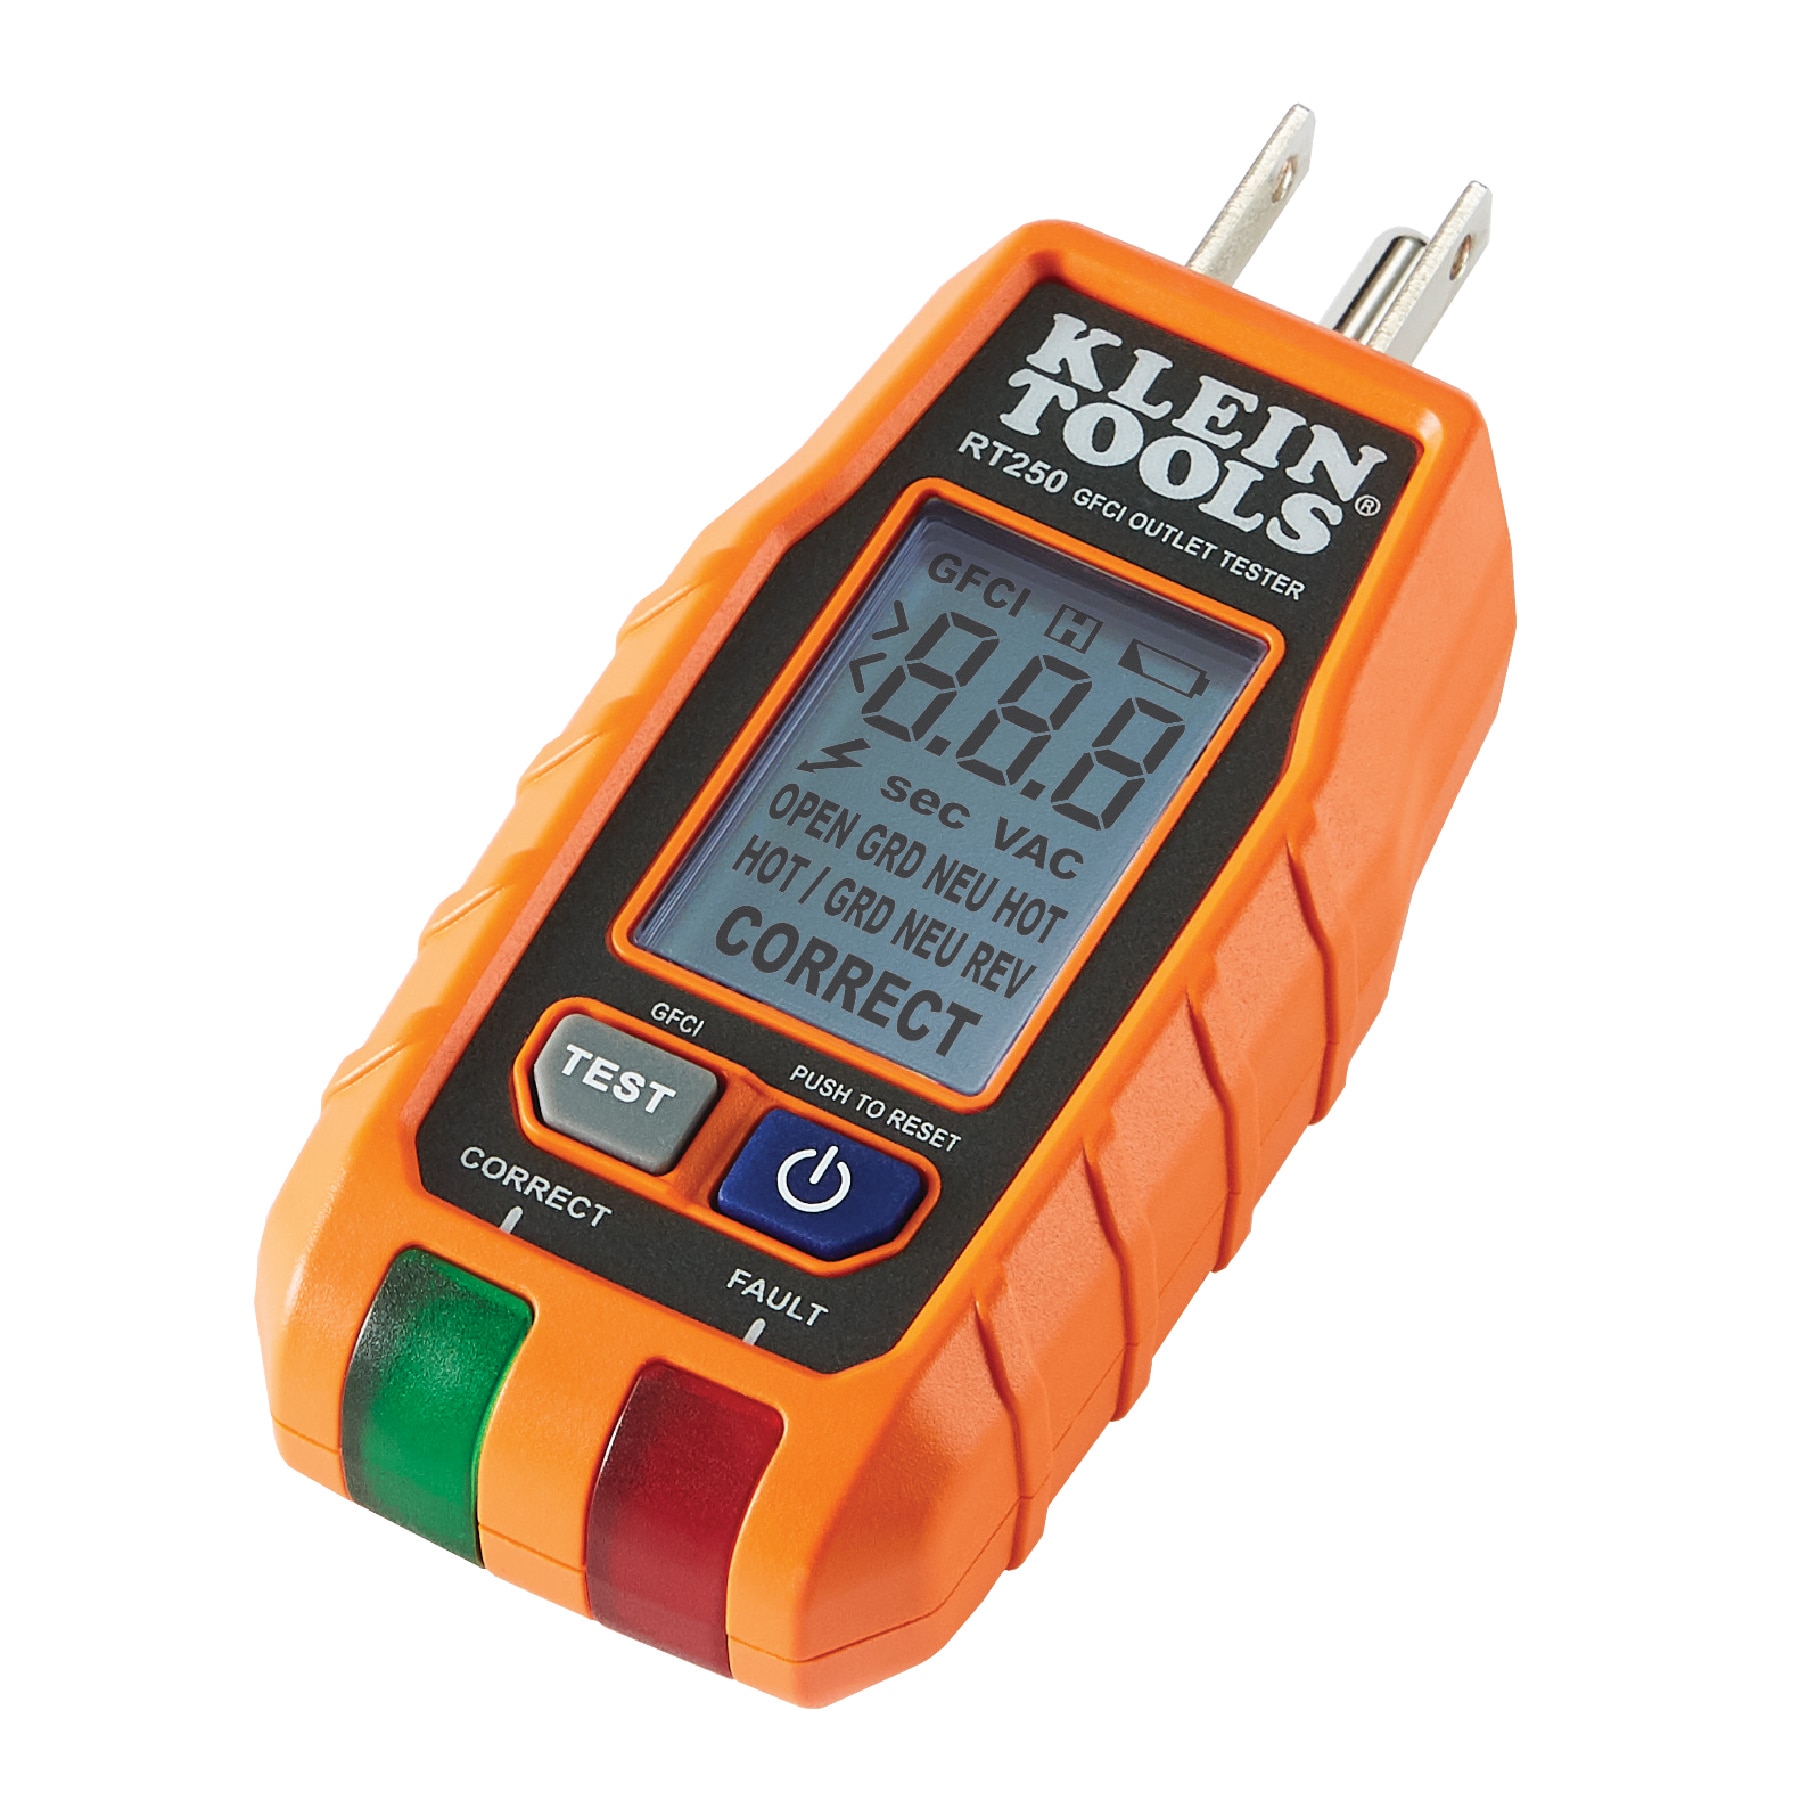 Klein Tools Lcd Insulation Tester Specialty Meter 1000-Volt in the  Specialty Meters department at